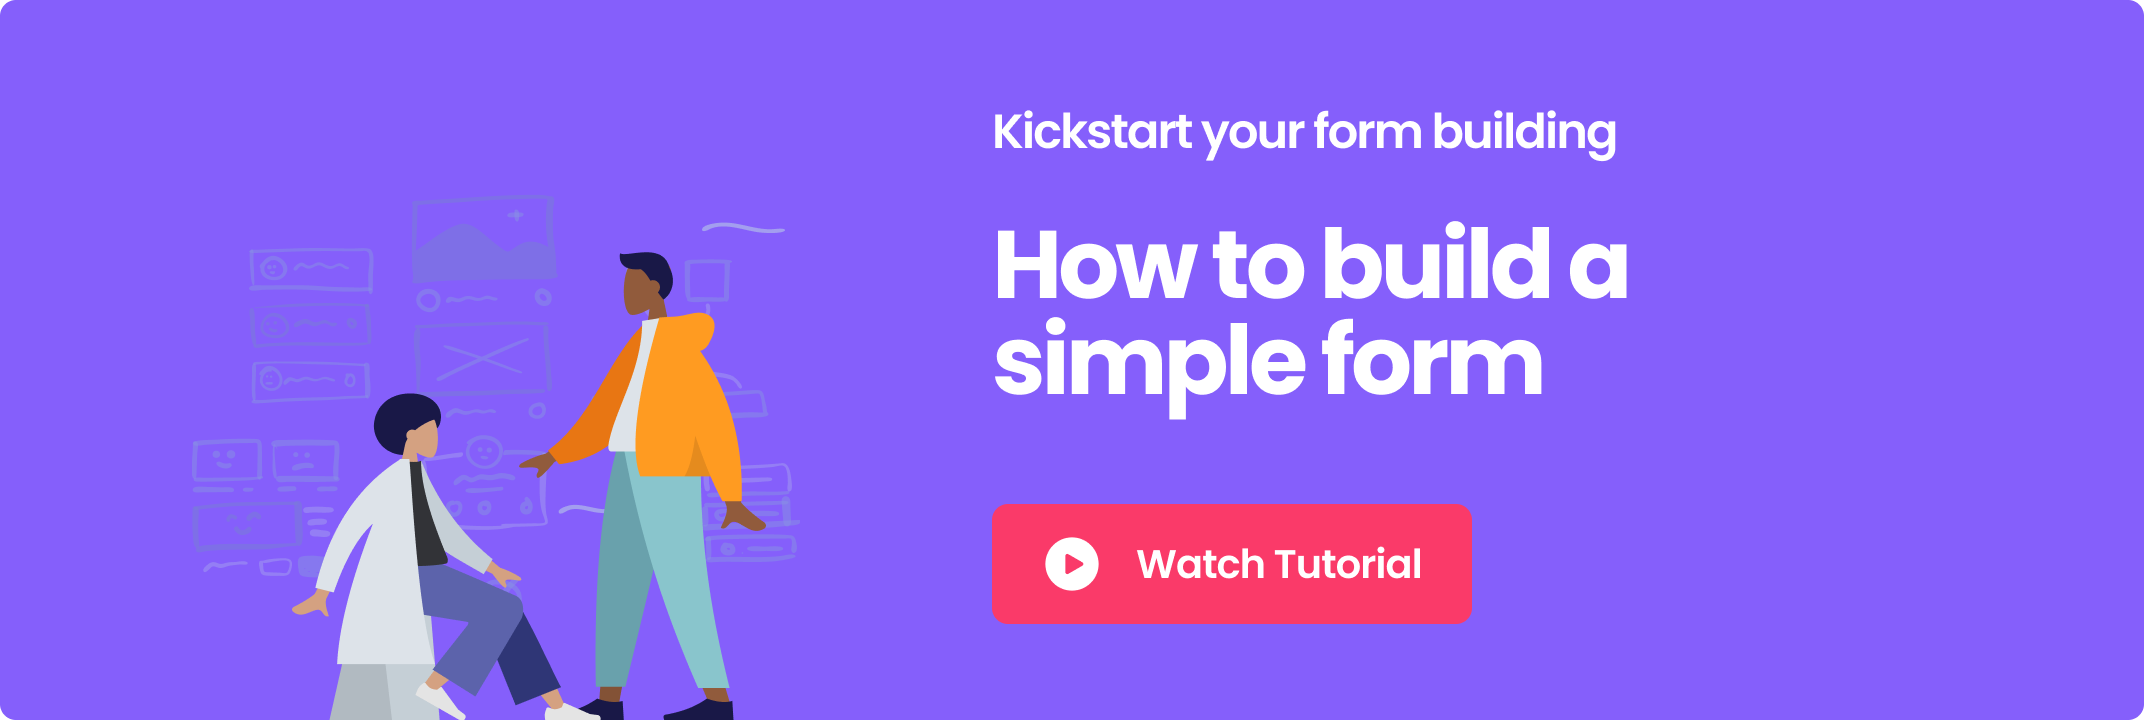 Visual thumbnail for the video 'How to build a simple form'